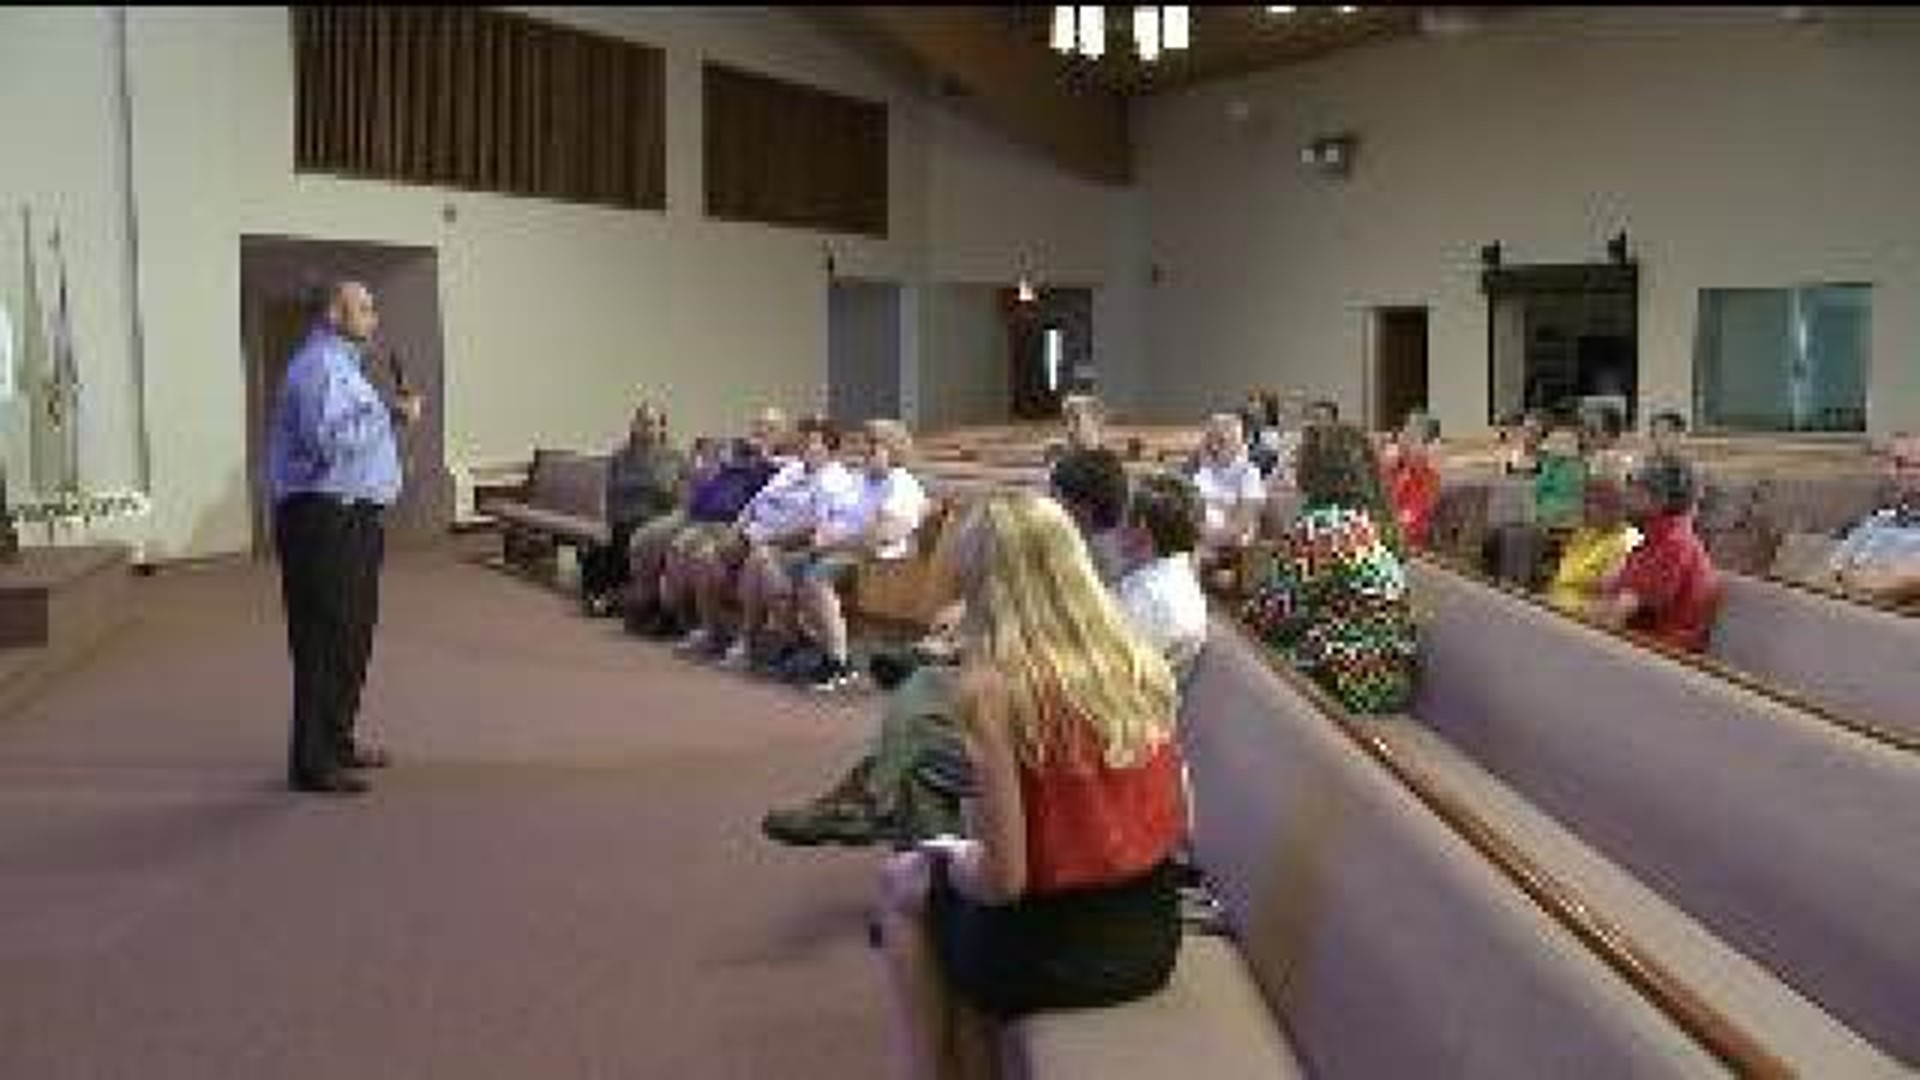 Controversial Claims Bring Community Together